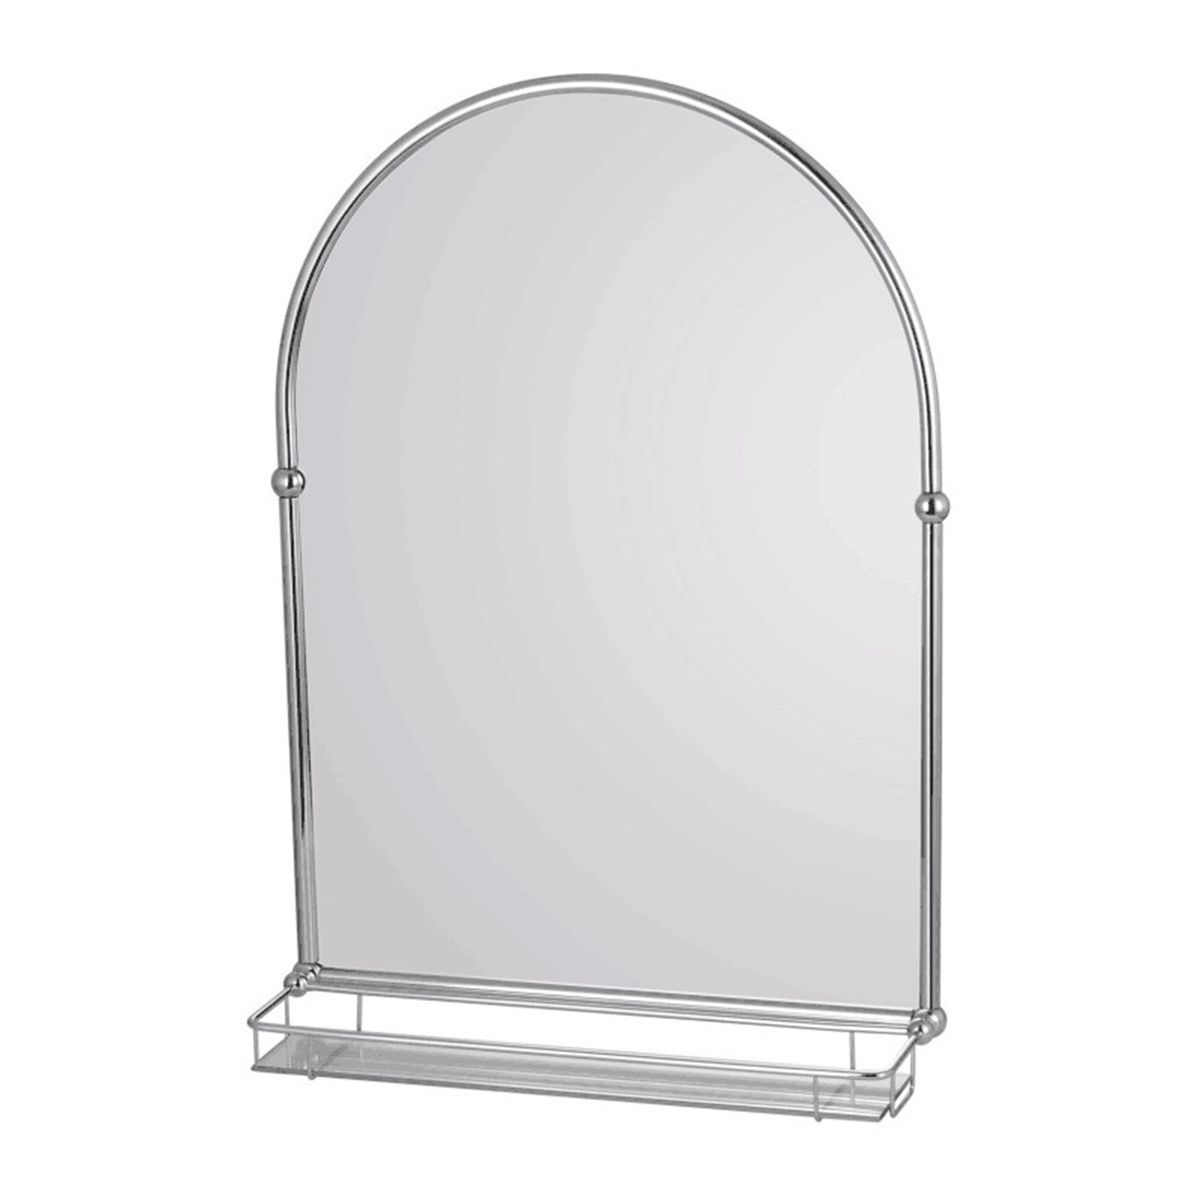 Frontline Holborn Traditional Arched Bathroom Mirror With Shelf Pertaining To Waved Arch Tall Traditional Wall Mirrors (View 4 of 15)